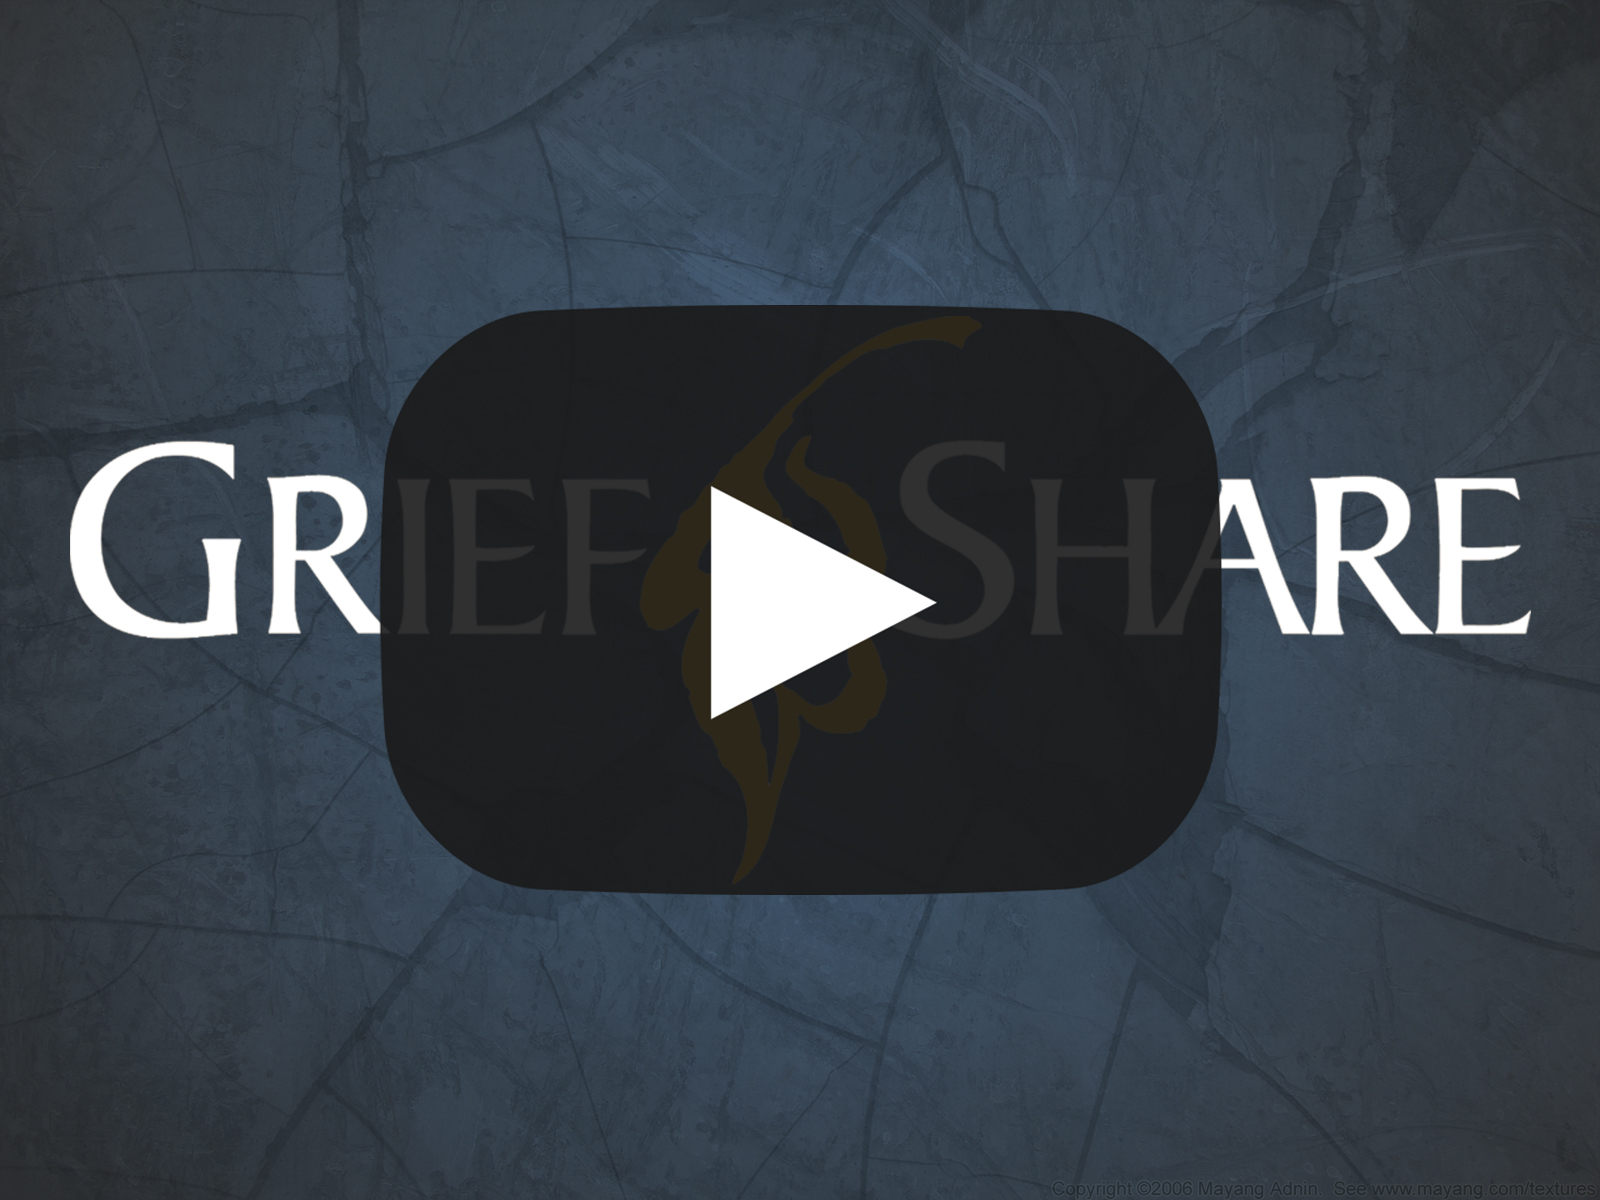 What is Grief Share all about? 